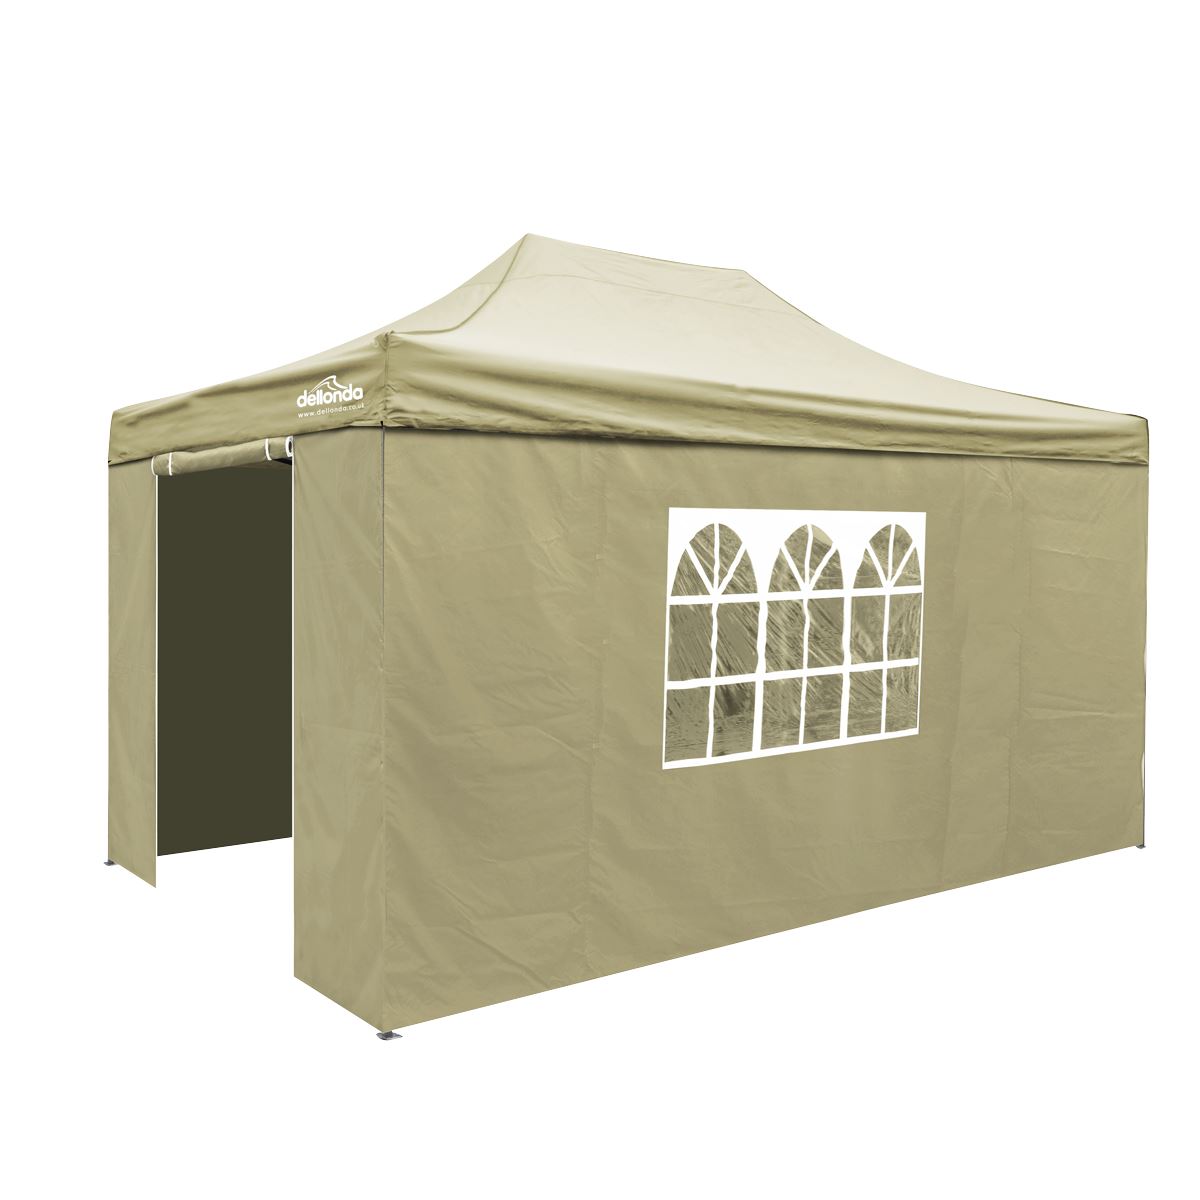 Dellonda Premium 3x4.5m Pop-Up Gazebo & Side Walls, PVC Coated, Water Resistant Fabric with Carry Bag, Rope, Stakes & Weight Bags - Beige